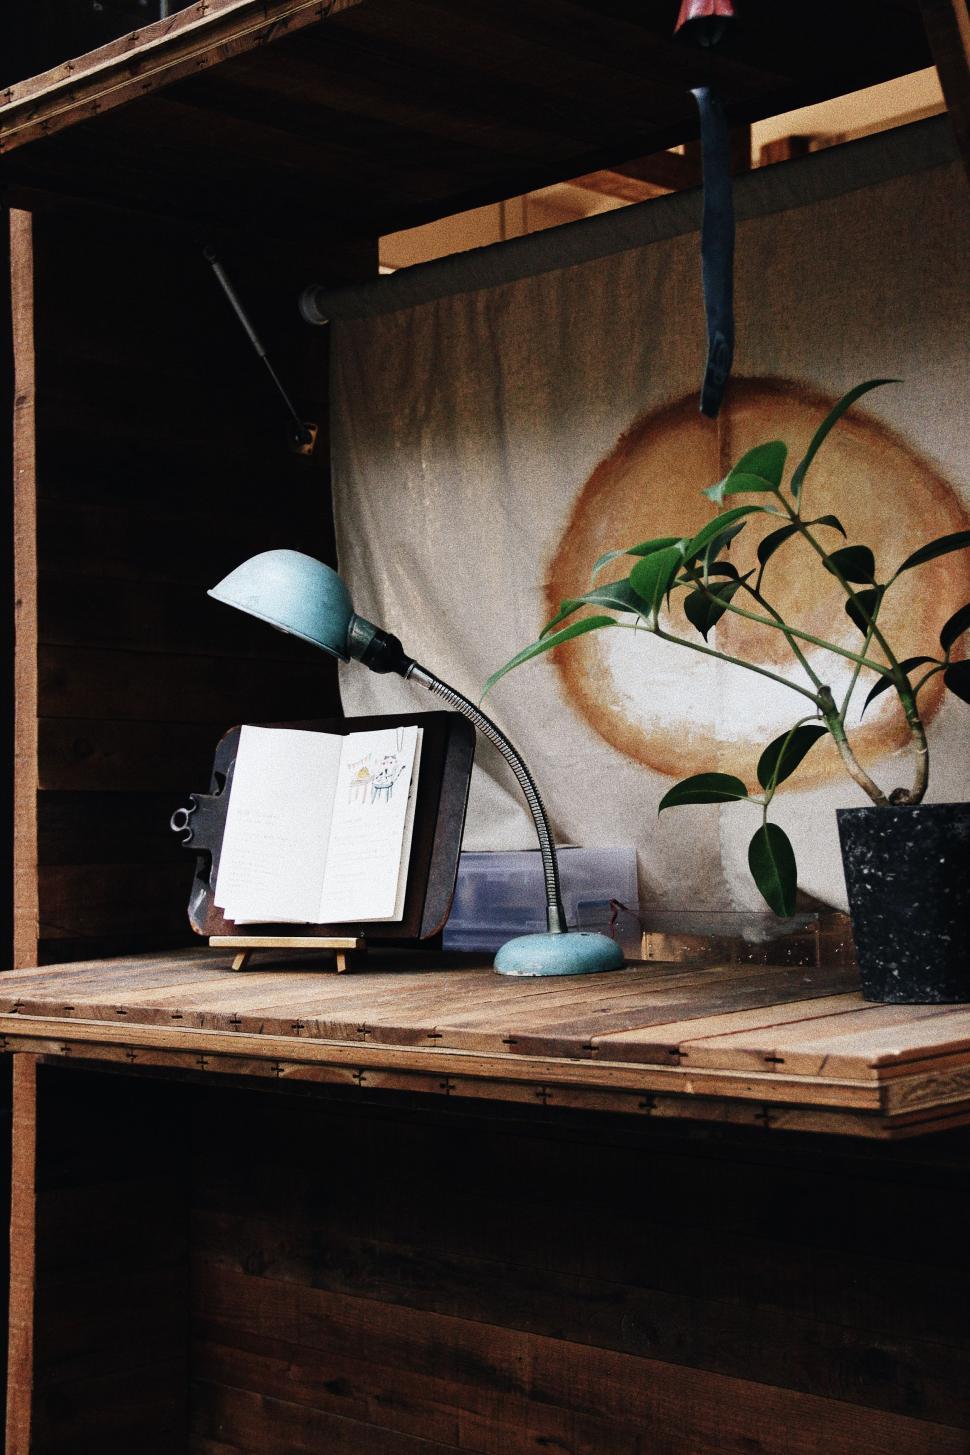 Free Image of Table With Plant and Lamp. 